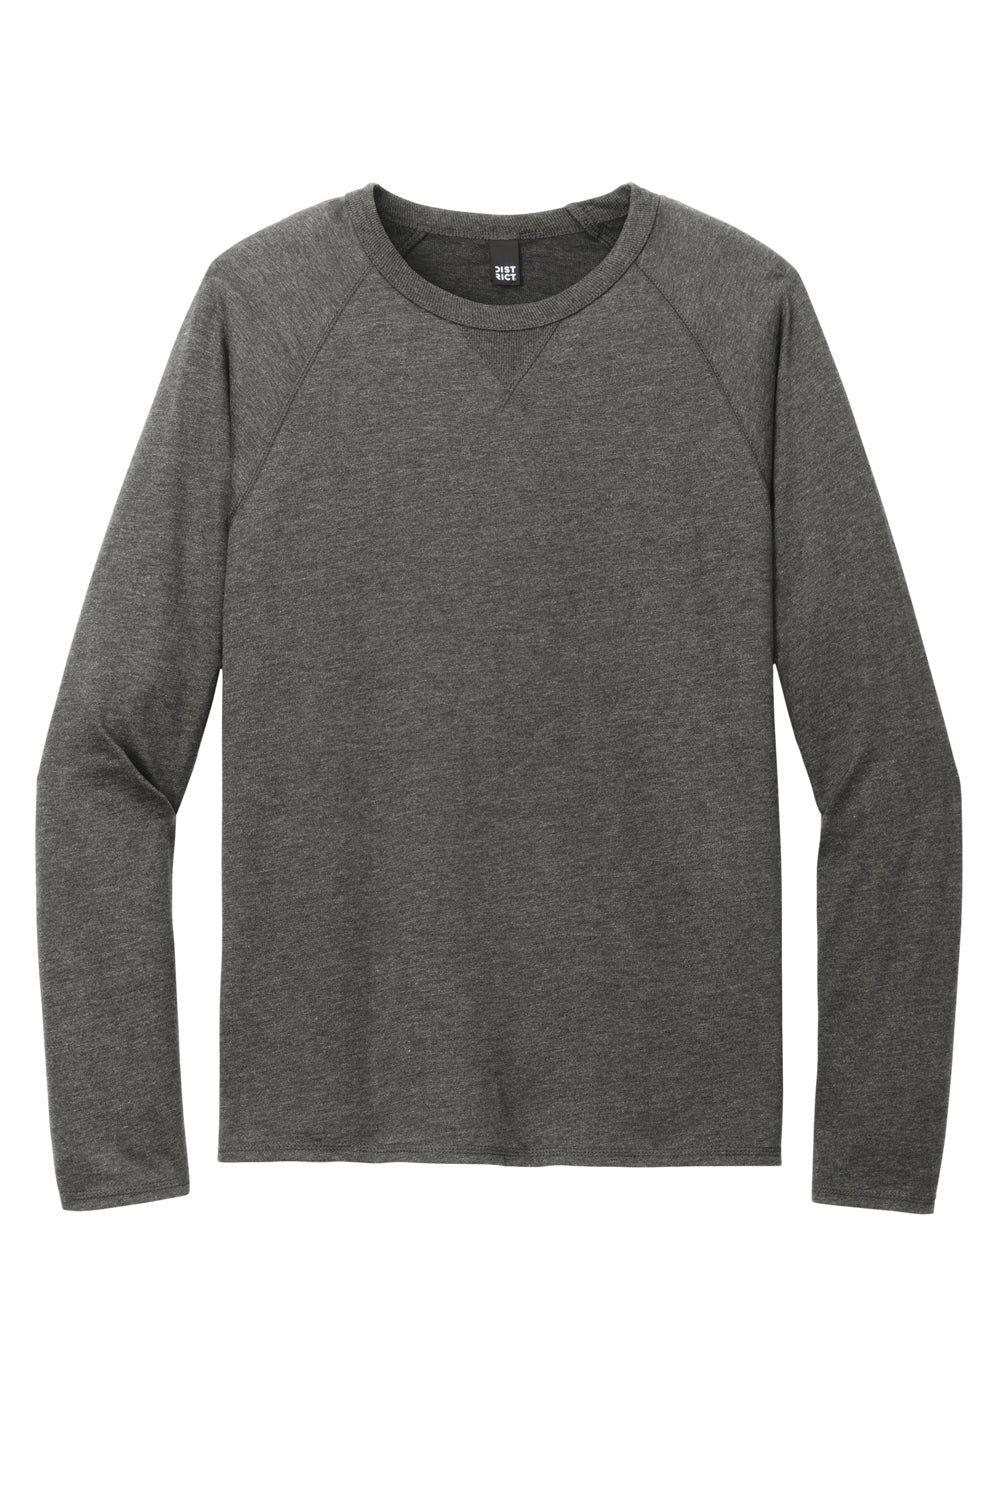 District Mens French Terry Long Sleeve Crewneck Sweatshirt Washed Coal Grey Flat Front